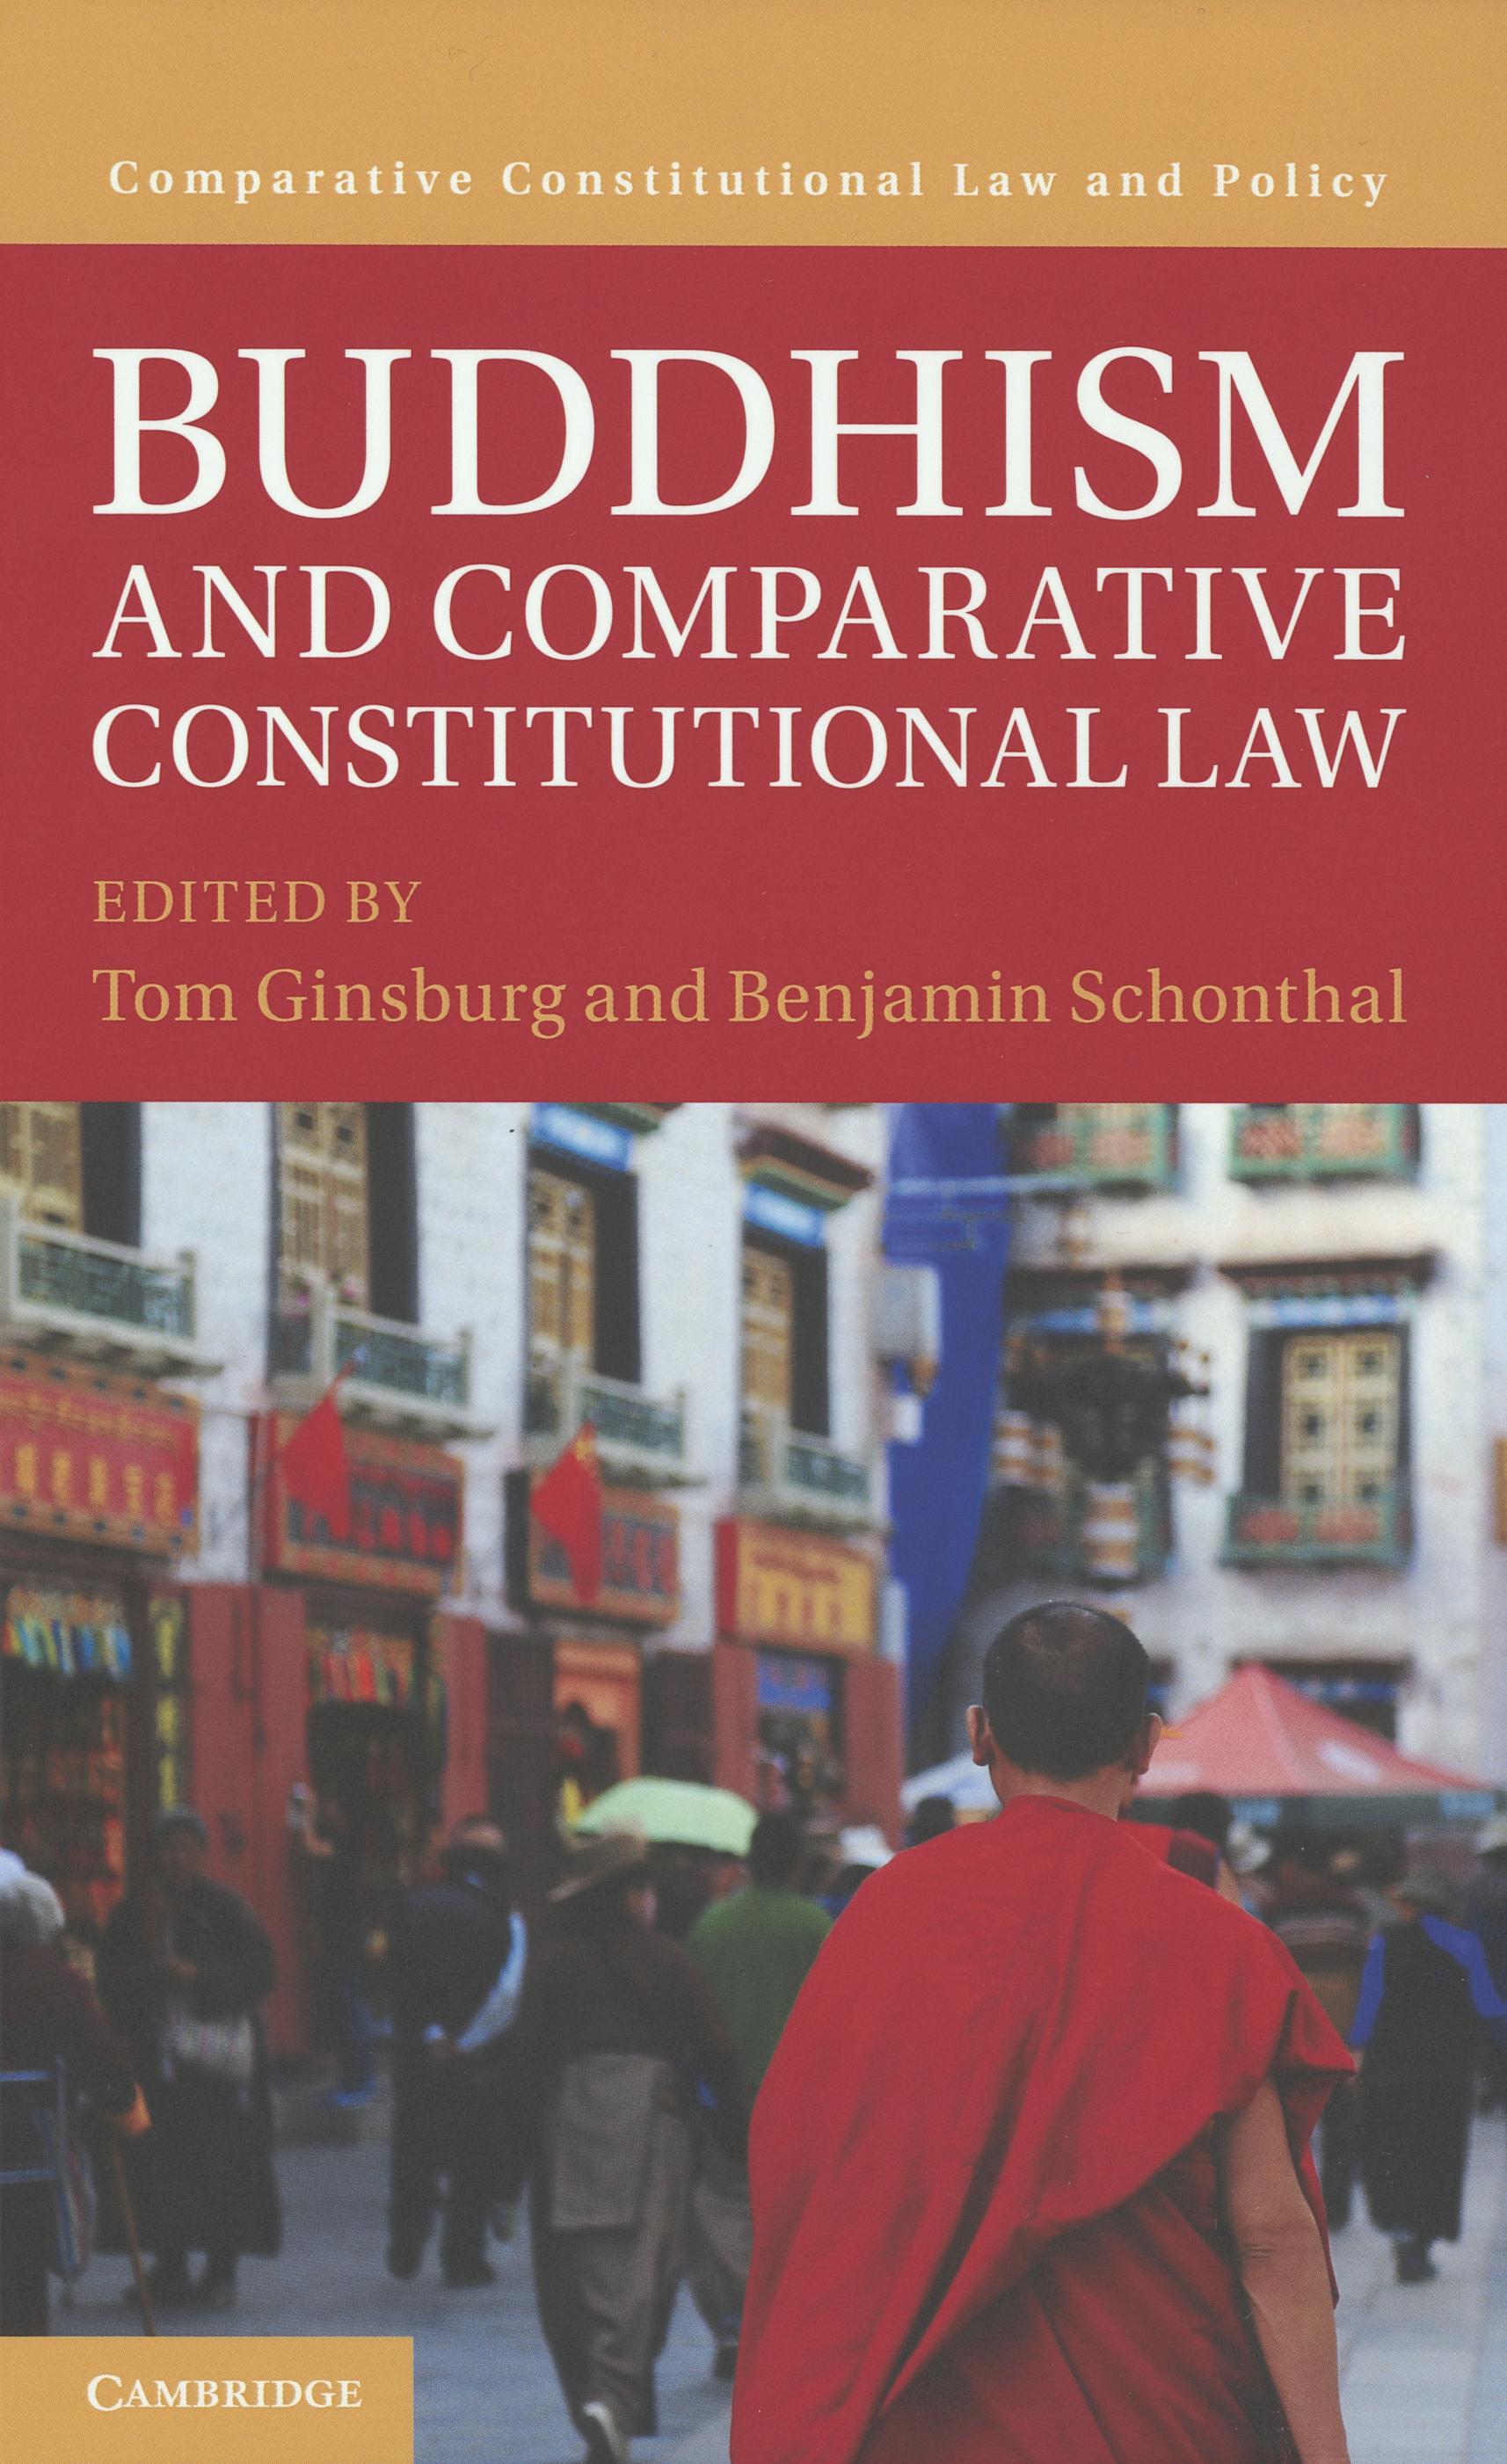 Buddhism and comparative constitutional law